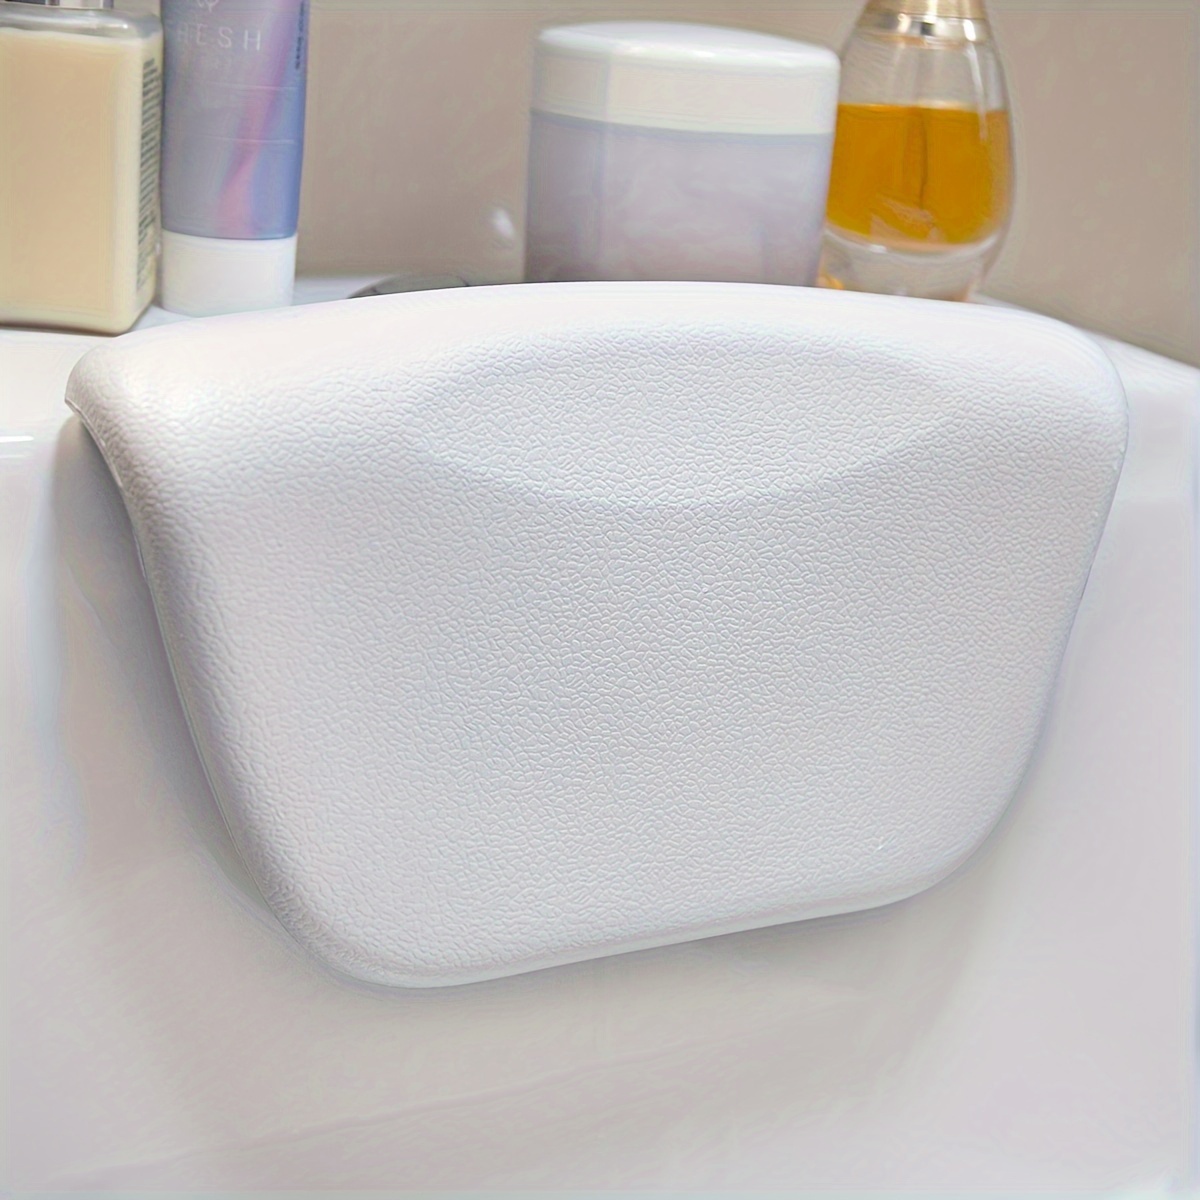 

Spa Bathtub Pillow Non-slip Bathtub Headrest Medium Soft Waterproof Bathtub Pillow With Suction Cups Easy To Clean Bathroom Accessories - Mother's Day Gift